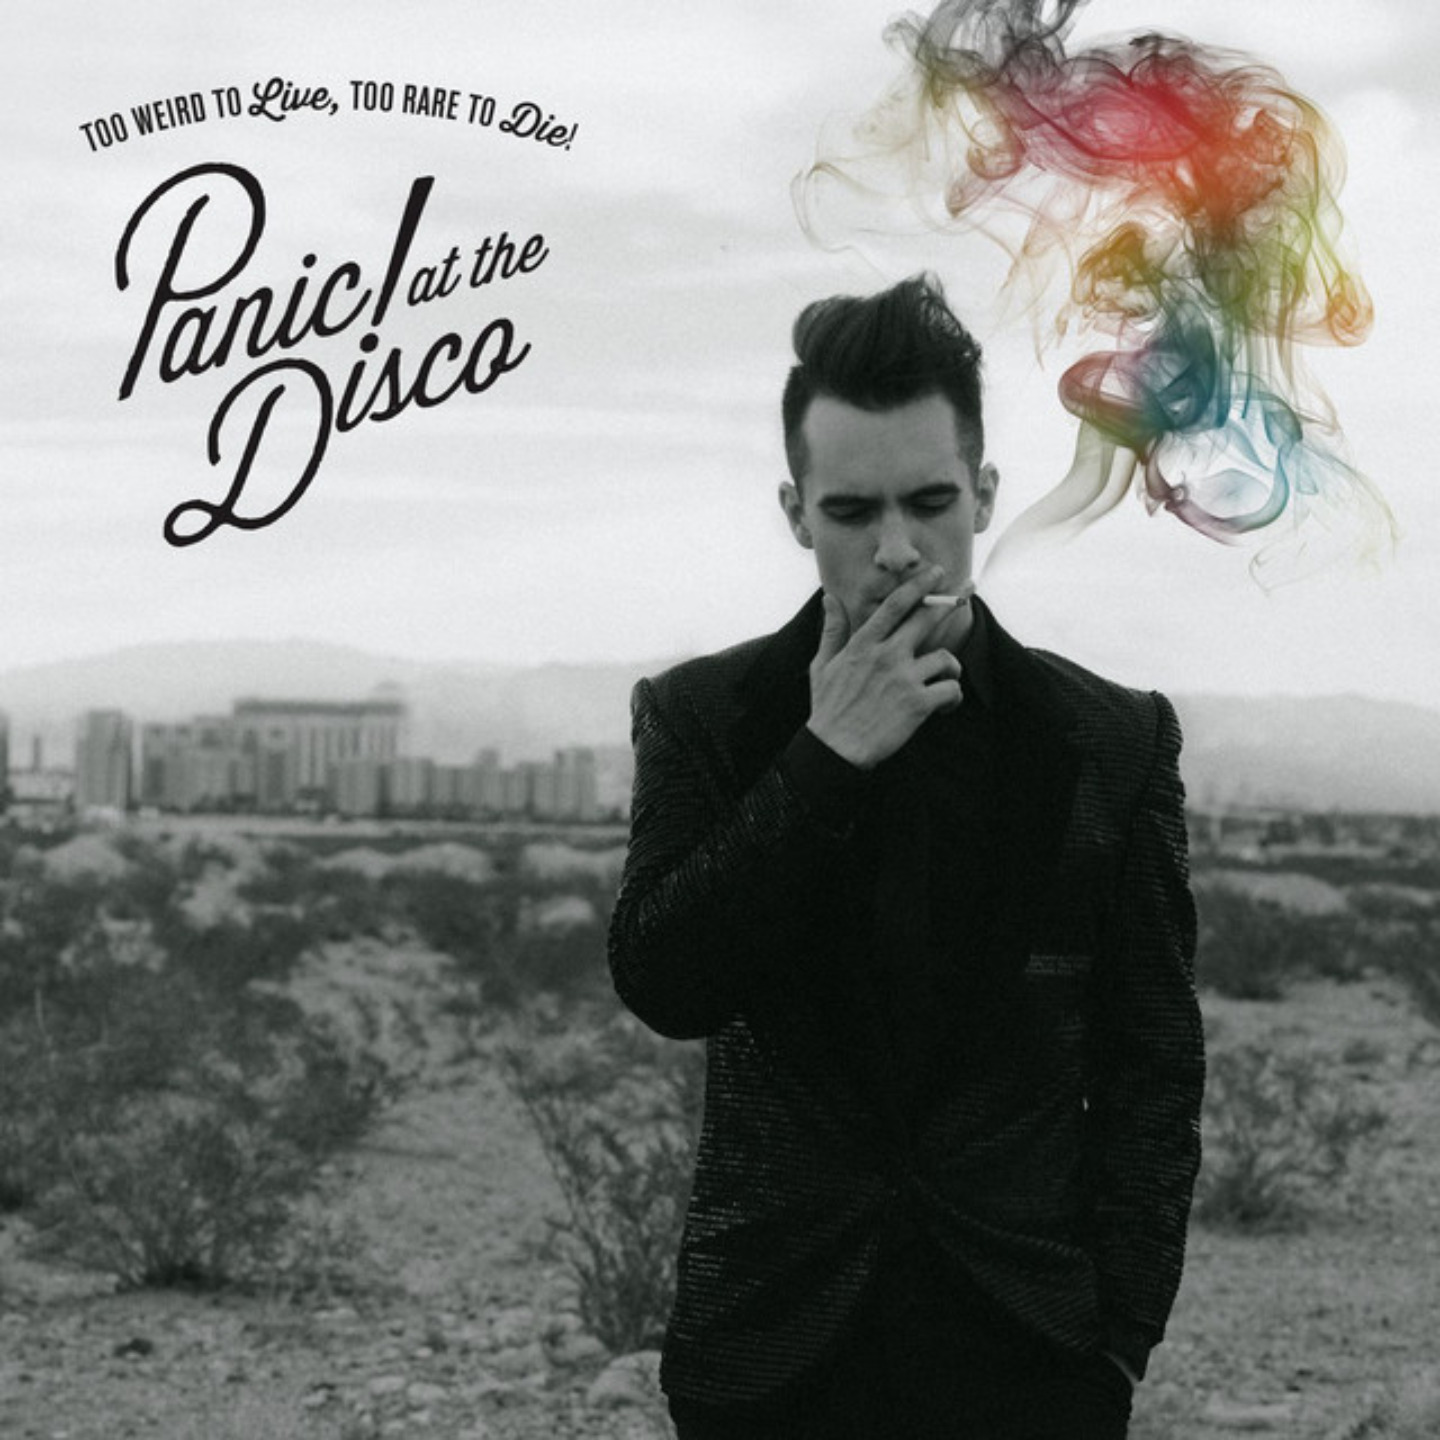 PANIC AT THE DISCO - Too Weird To Live, Too Rare To Die LP